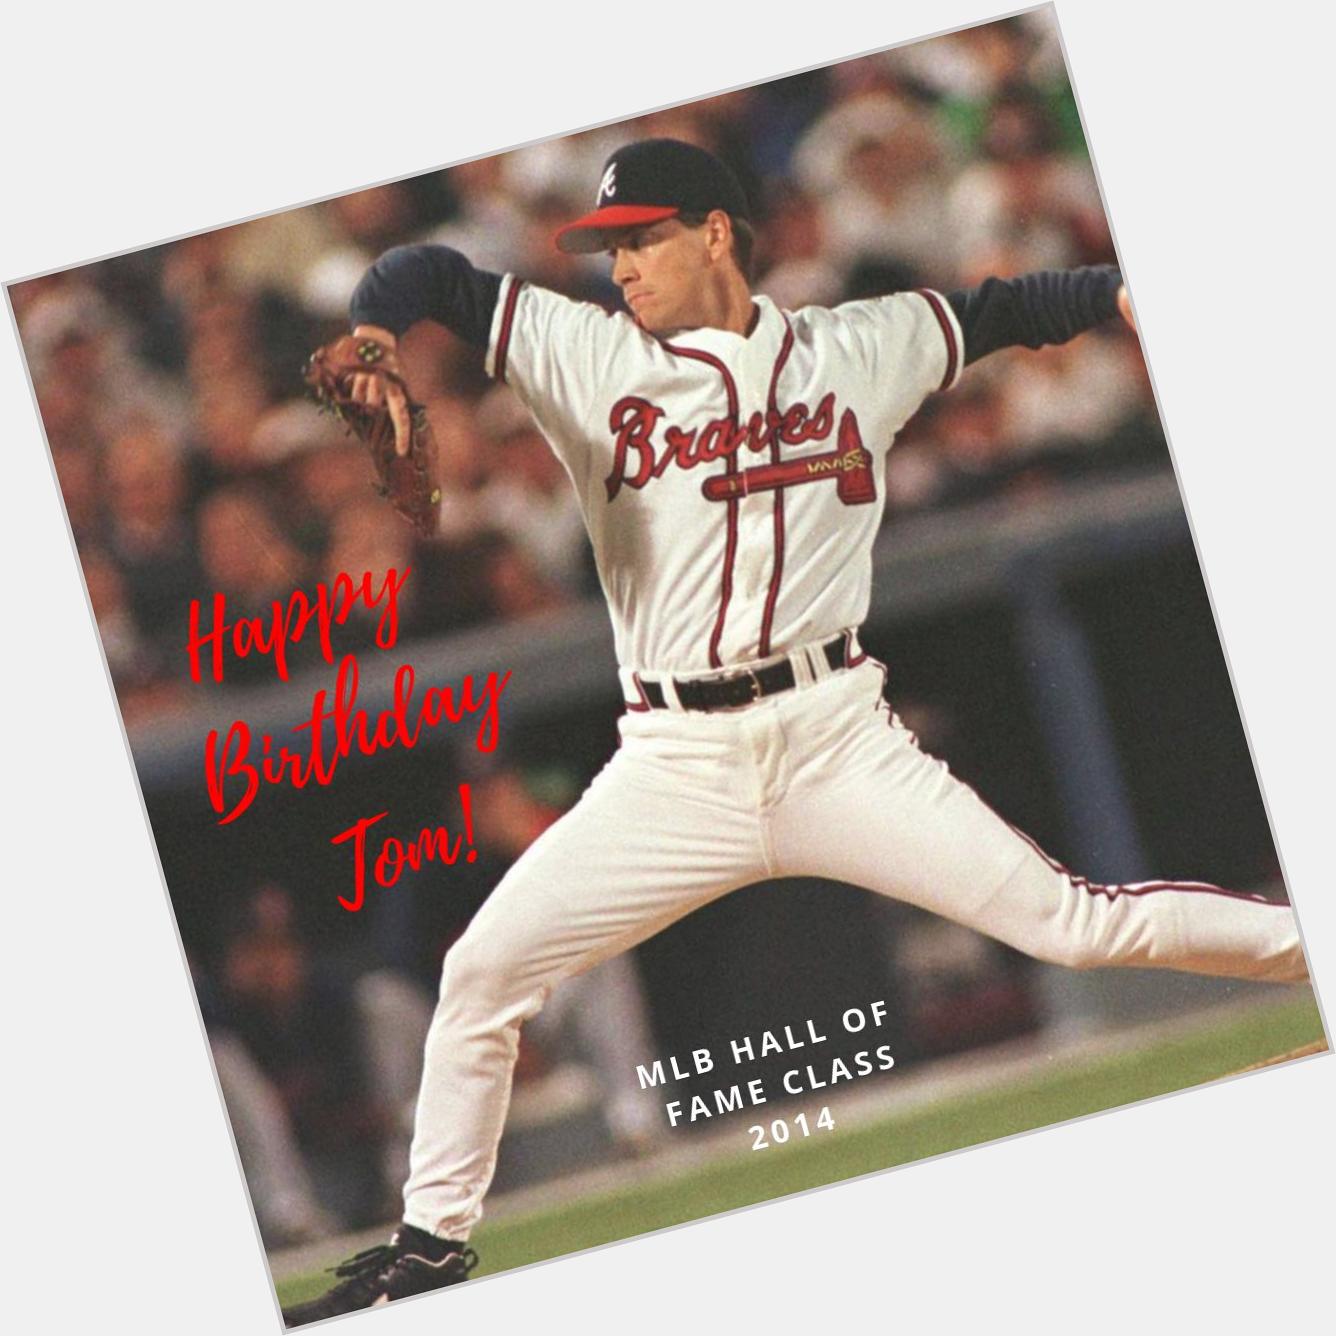 Happy Birthday to the 1995 World Series MVP and 2014 Hall of Famer, 